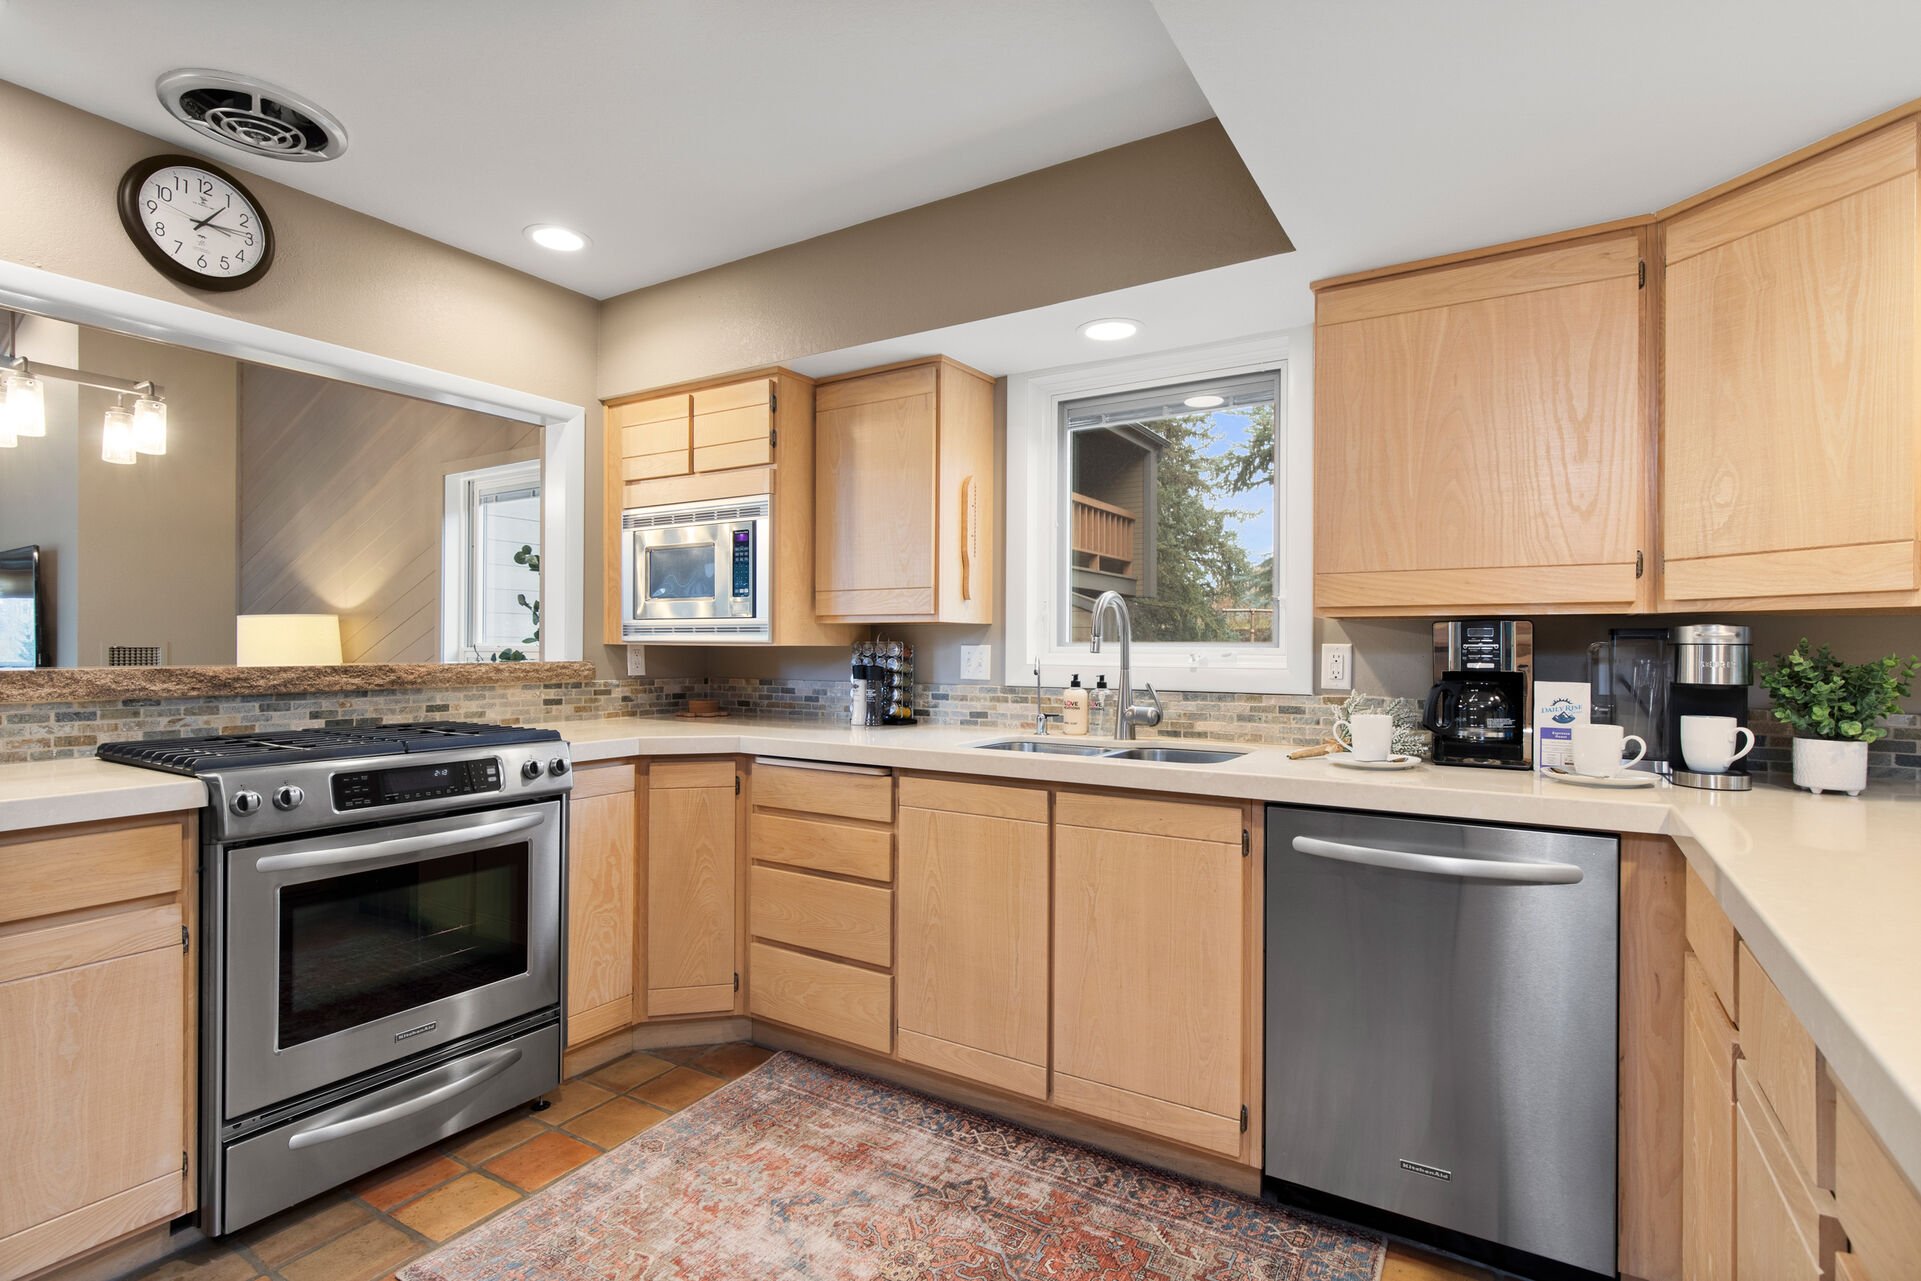 Fully equipped gourmet kitchen with stainless steel appliances,  stone countertops, separate breakfast nook/table area, bar seating for four, and access to the homes private back yard